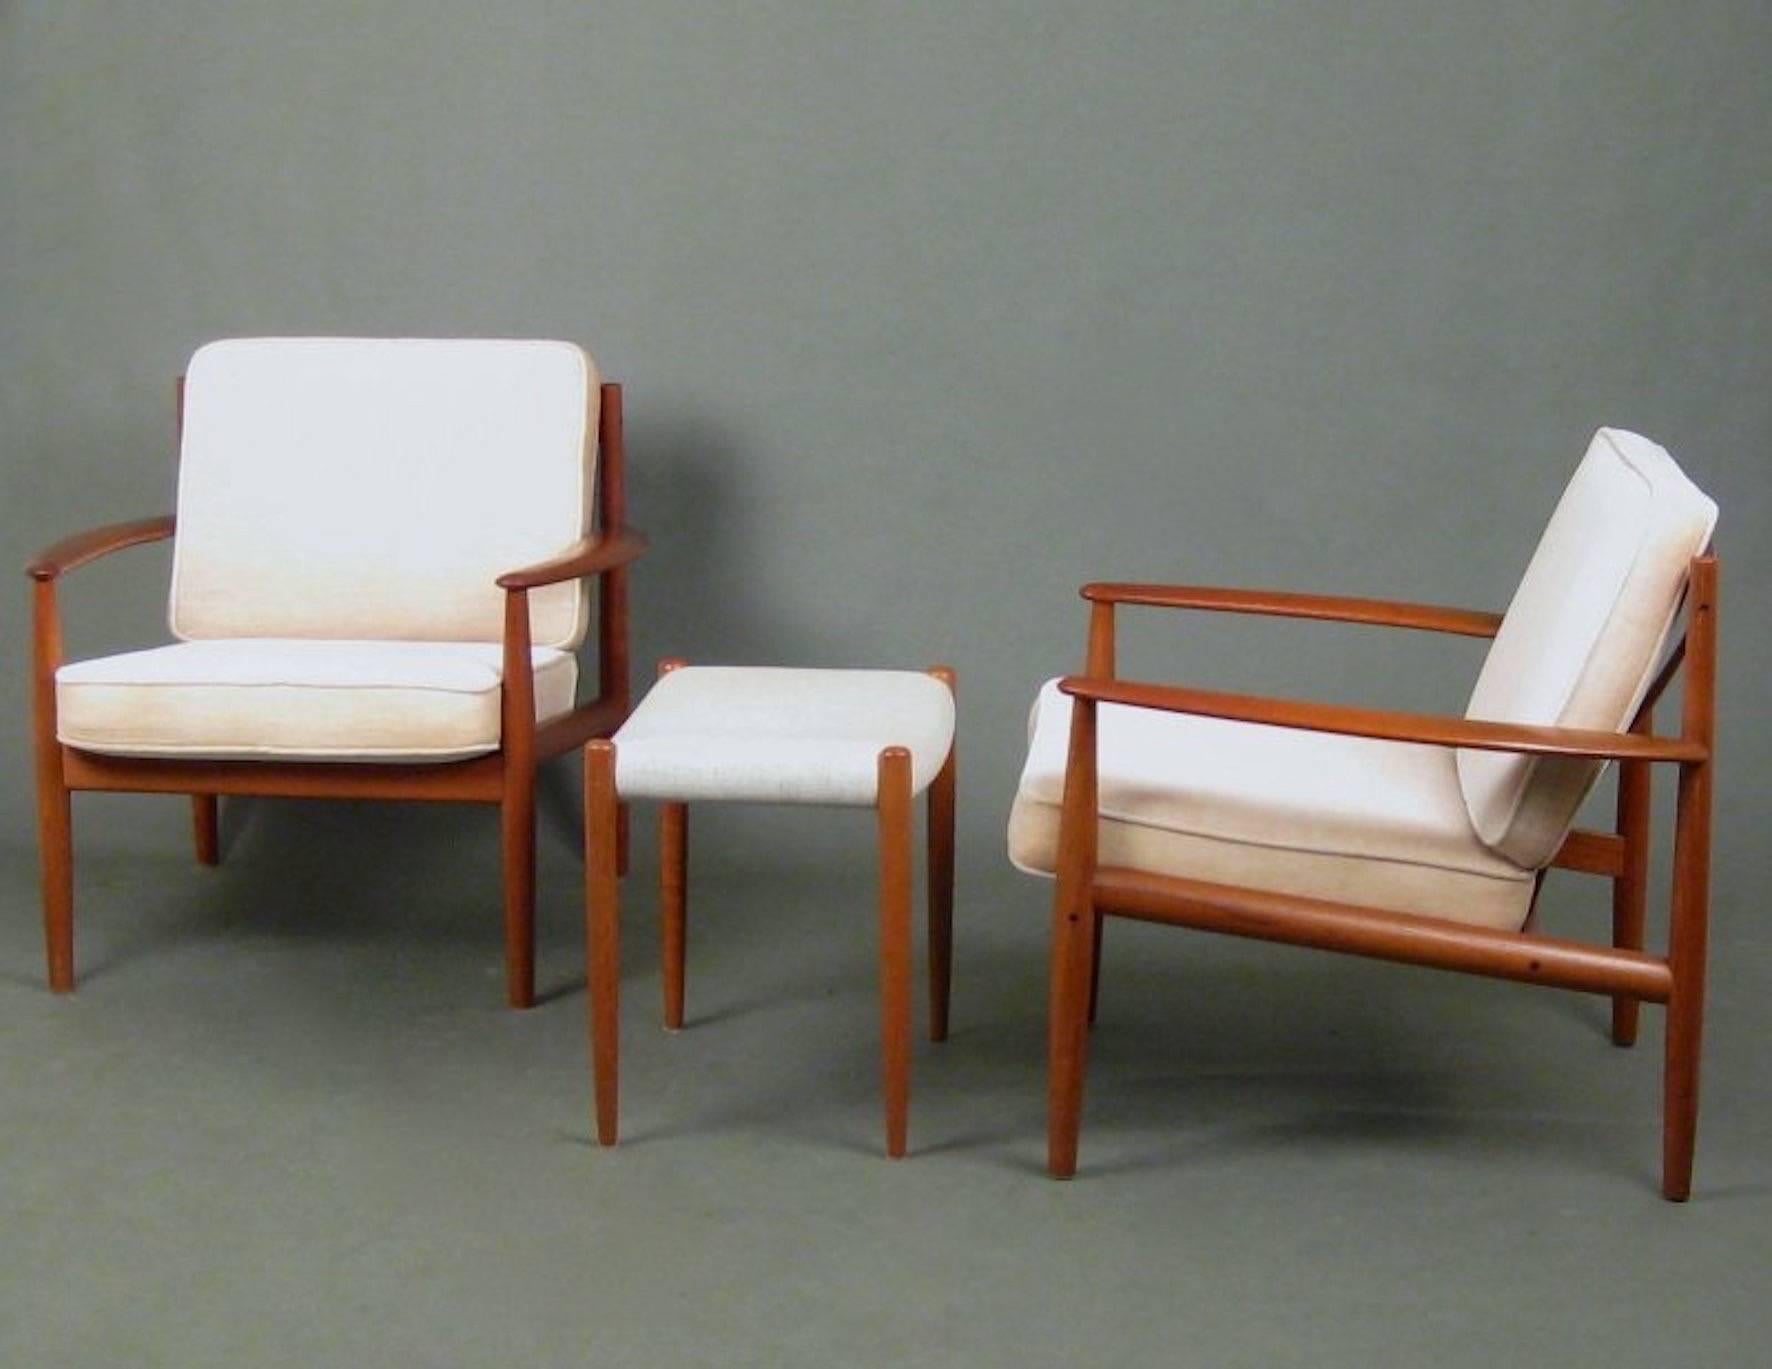 Midcentury Danish Easy Lounge Chairs by Grete Jalk for France & Søn, 1960 For Sale 1